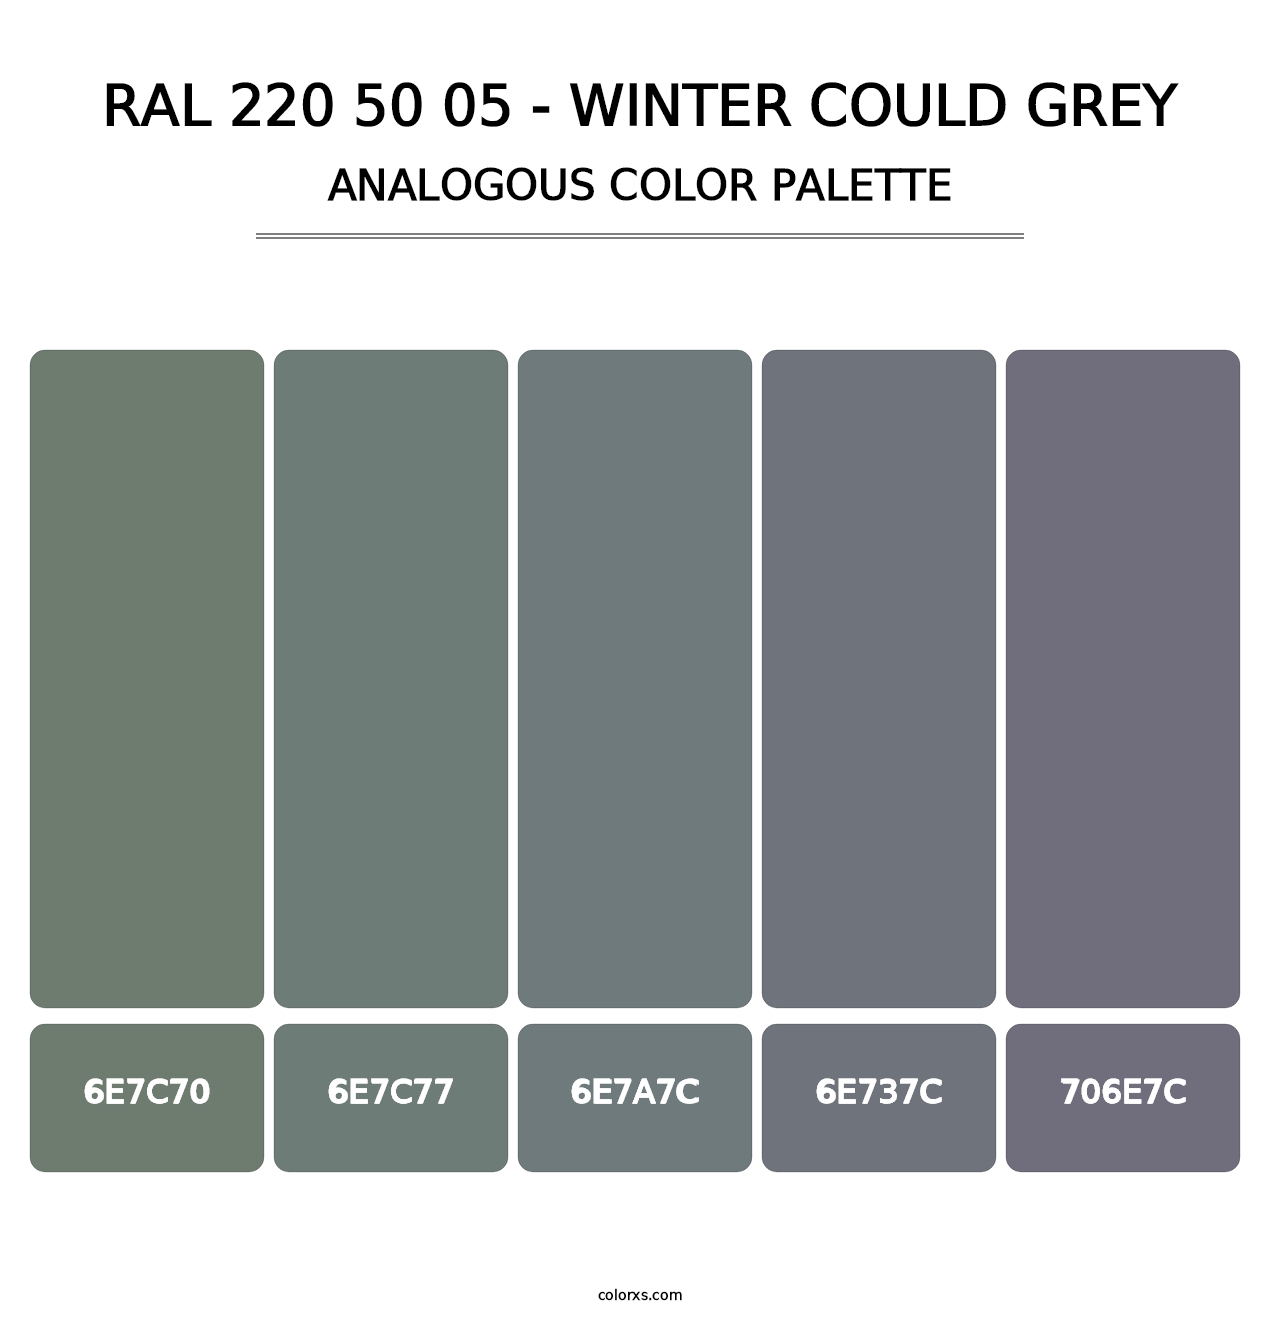 RAL 220 50 05 - Winter Could Grey - Analogous Color Palette